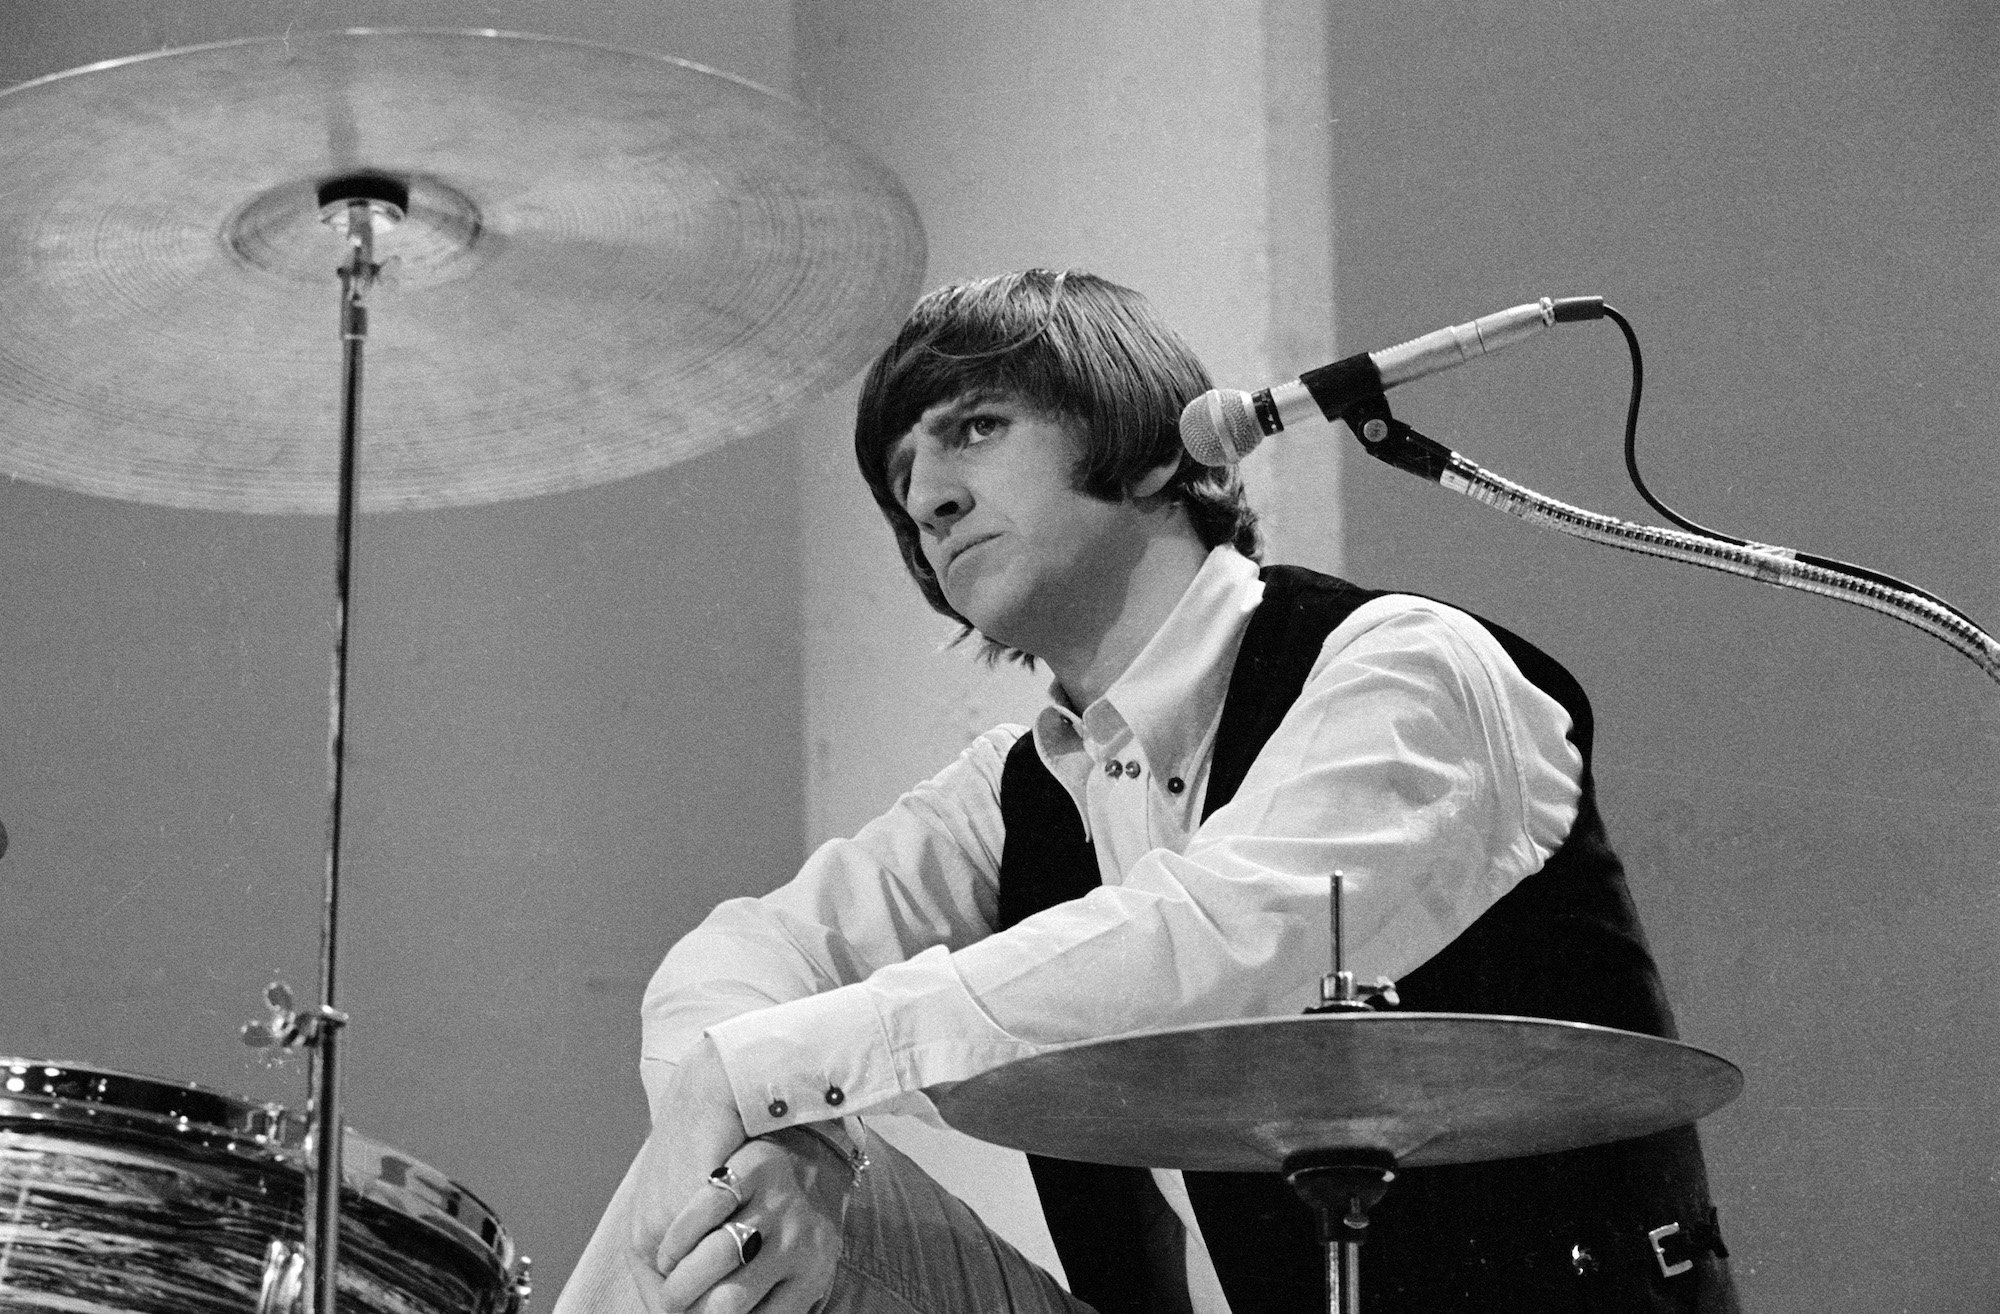 Ringo Starr with The Beatles at rehearsal for The Ed Sullivan Show